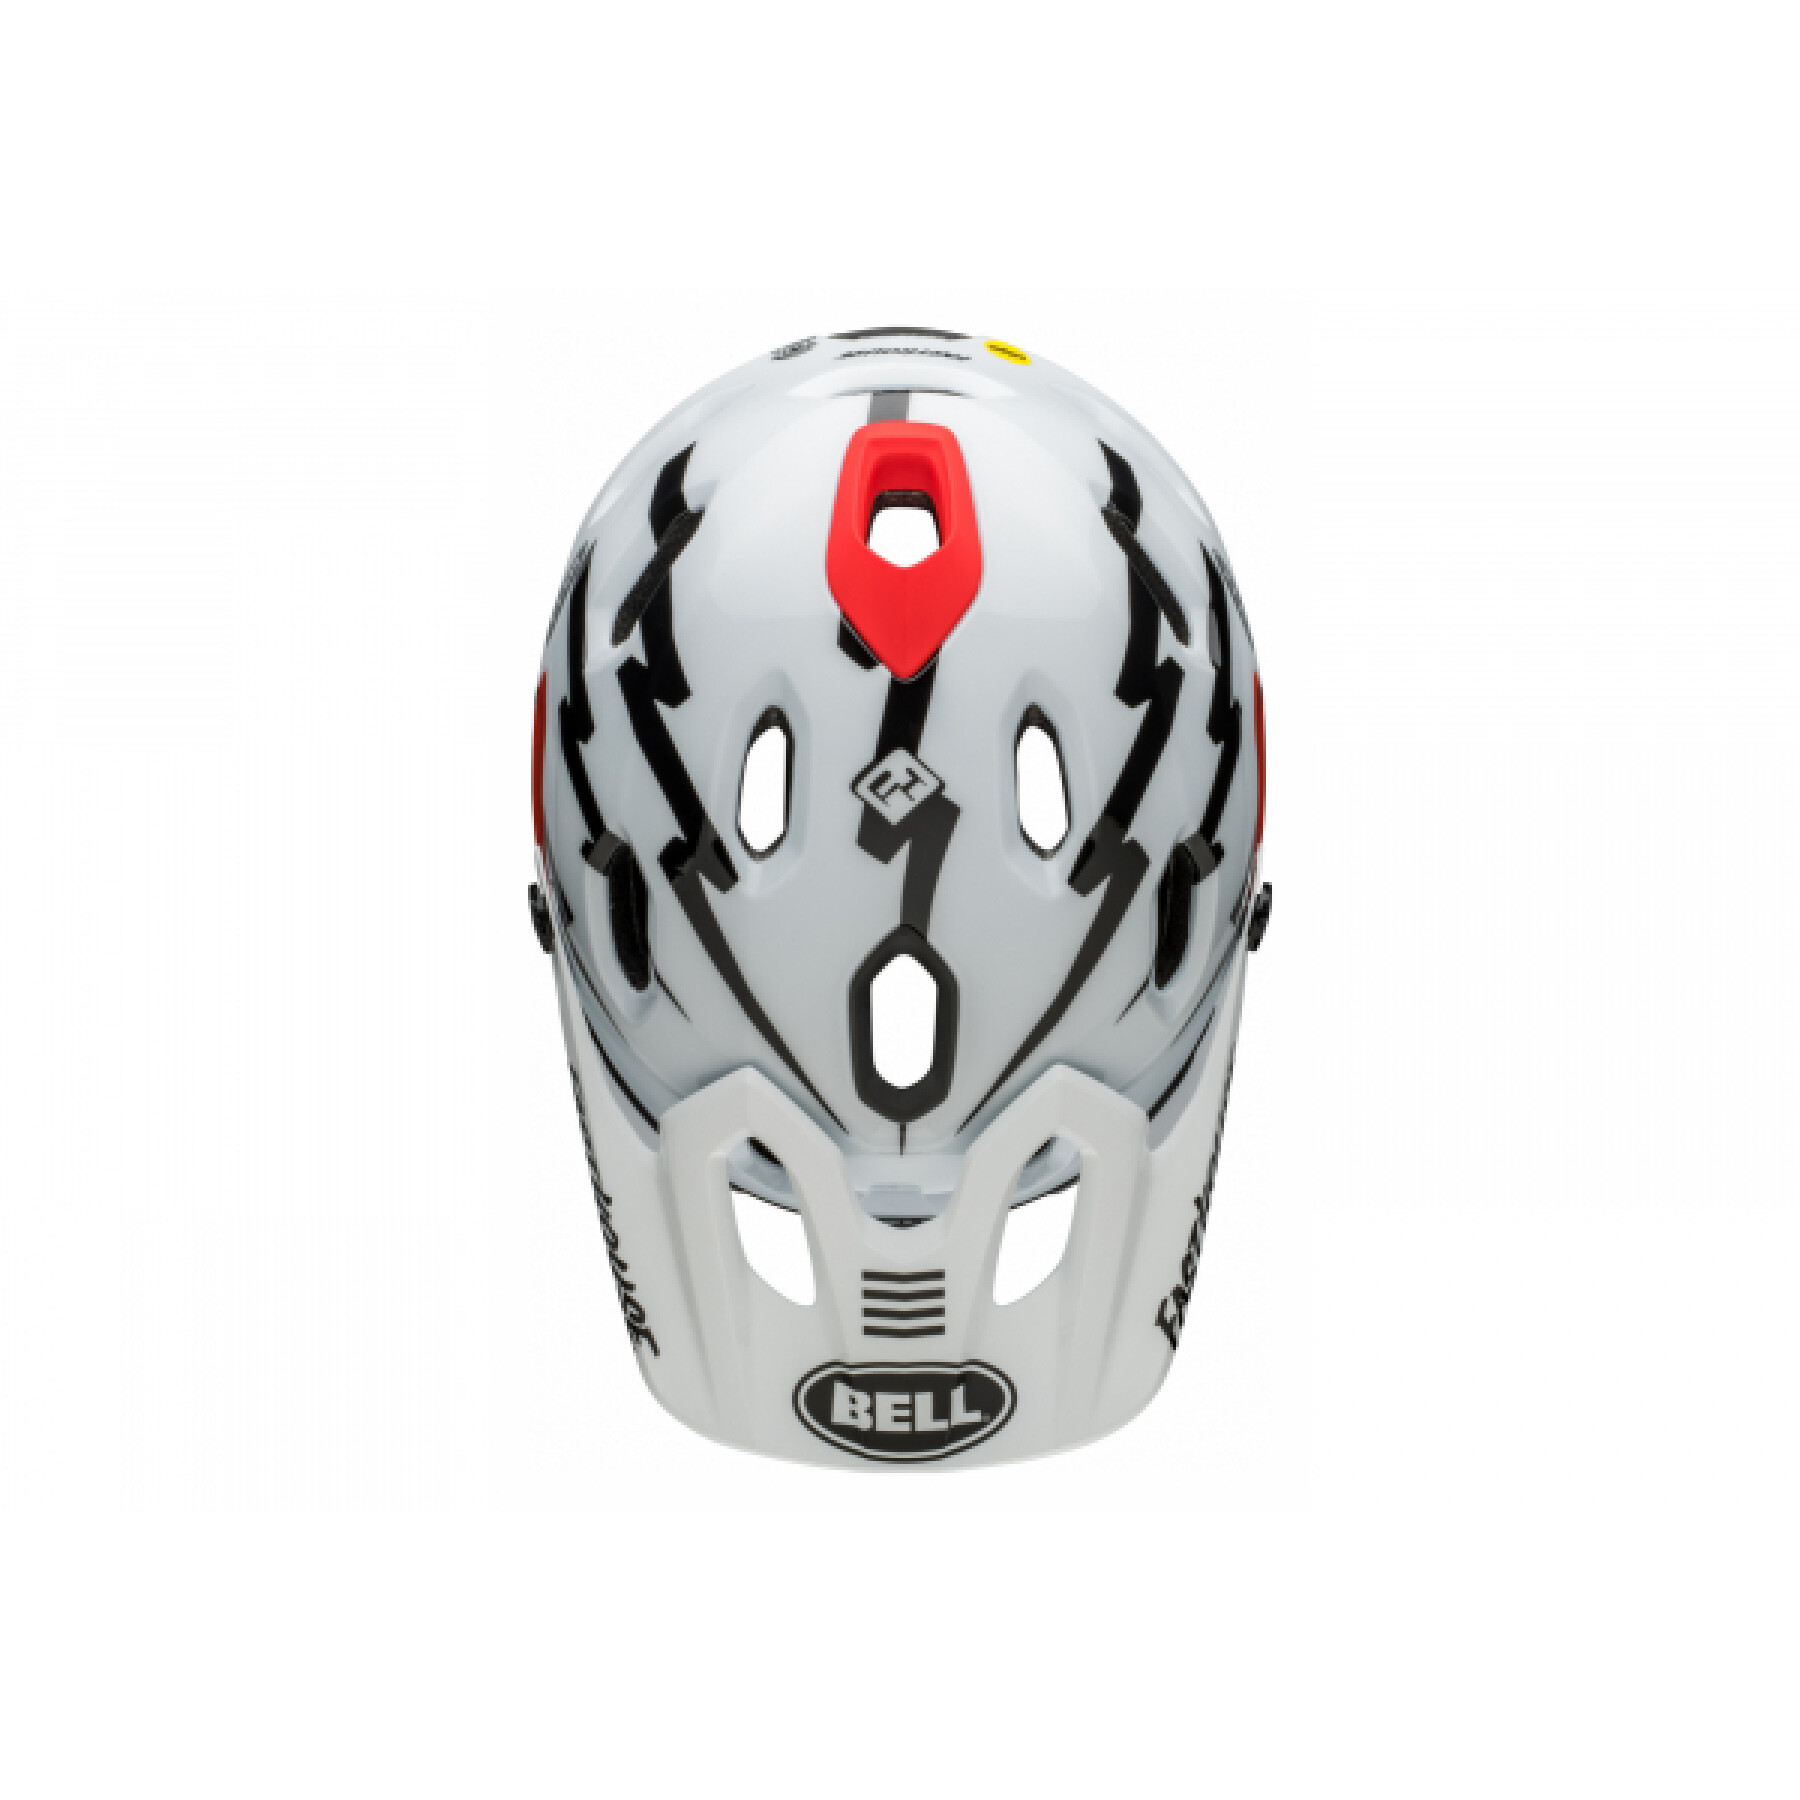 Headset Bell Super Dh Mips